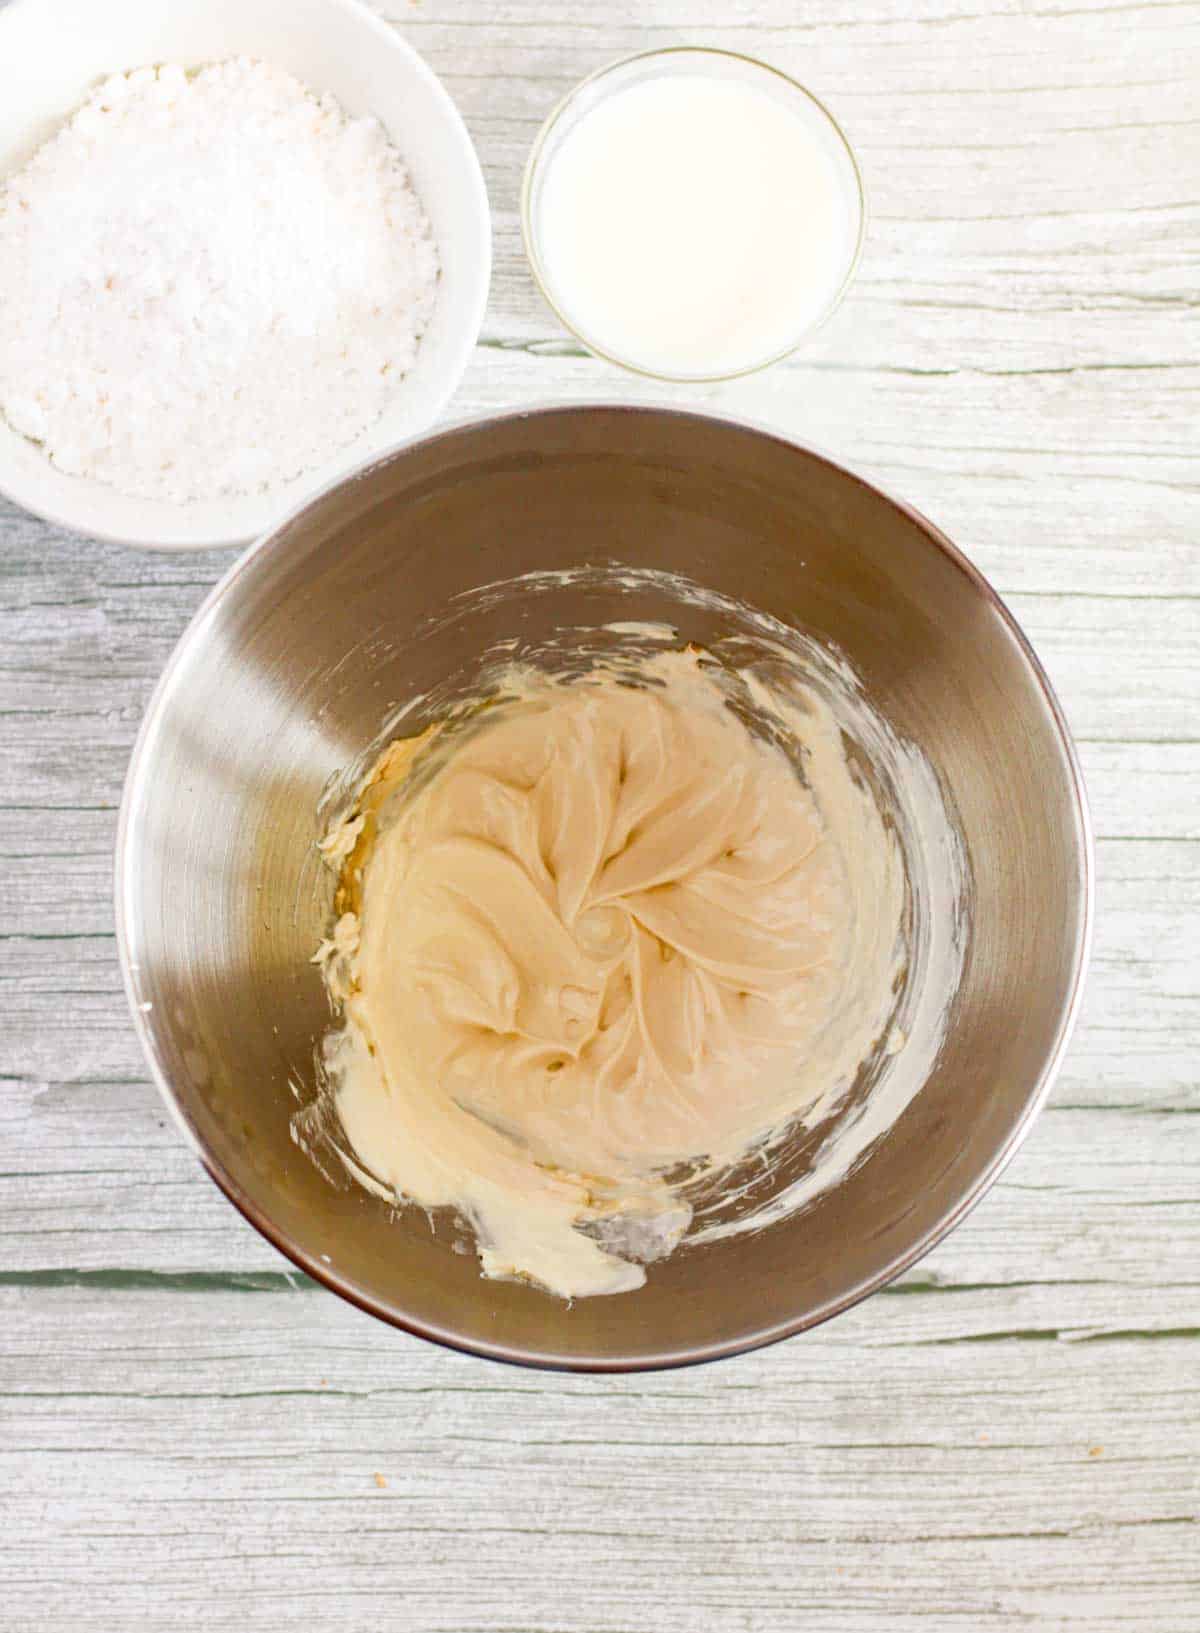 A metal bowl with flour, sugar and butter on a wooden table.